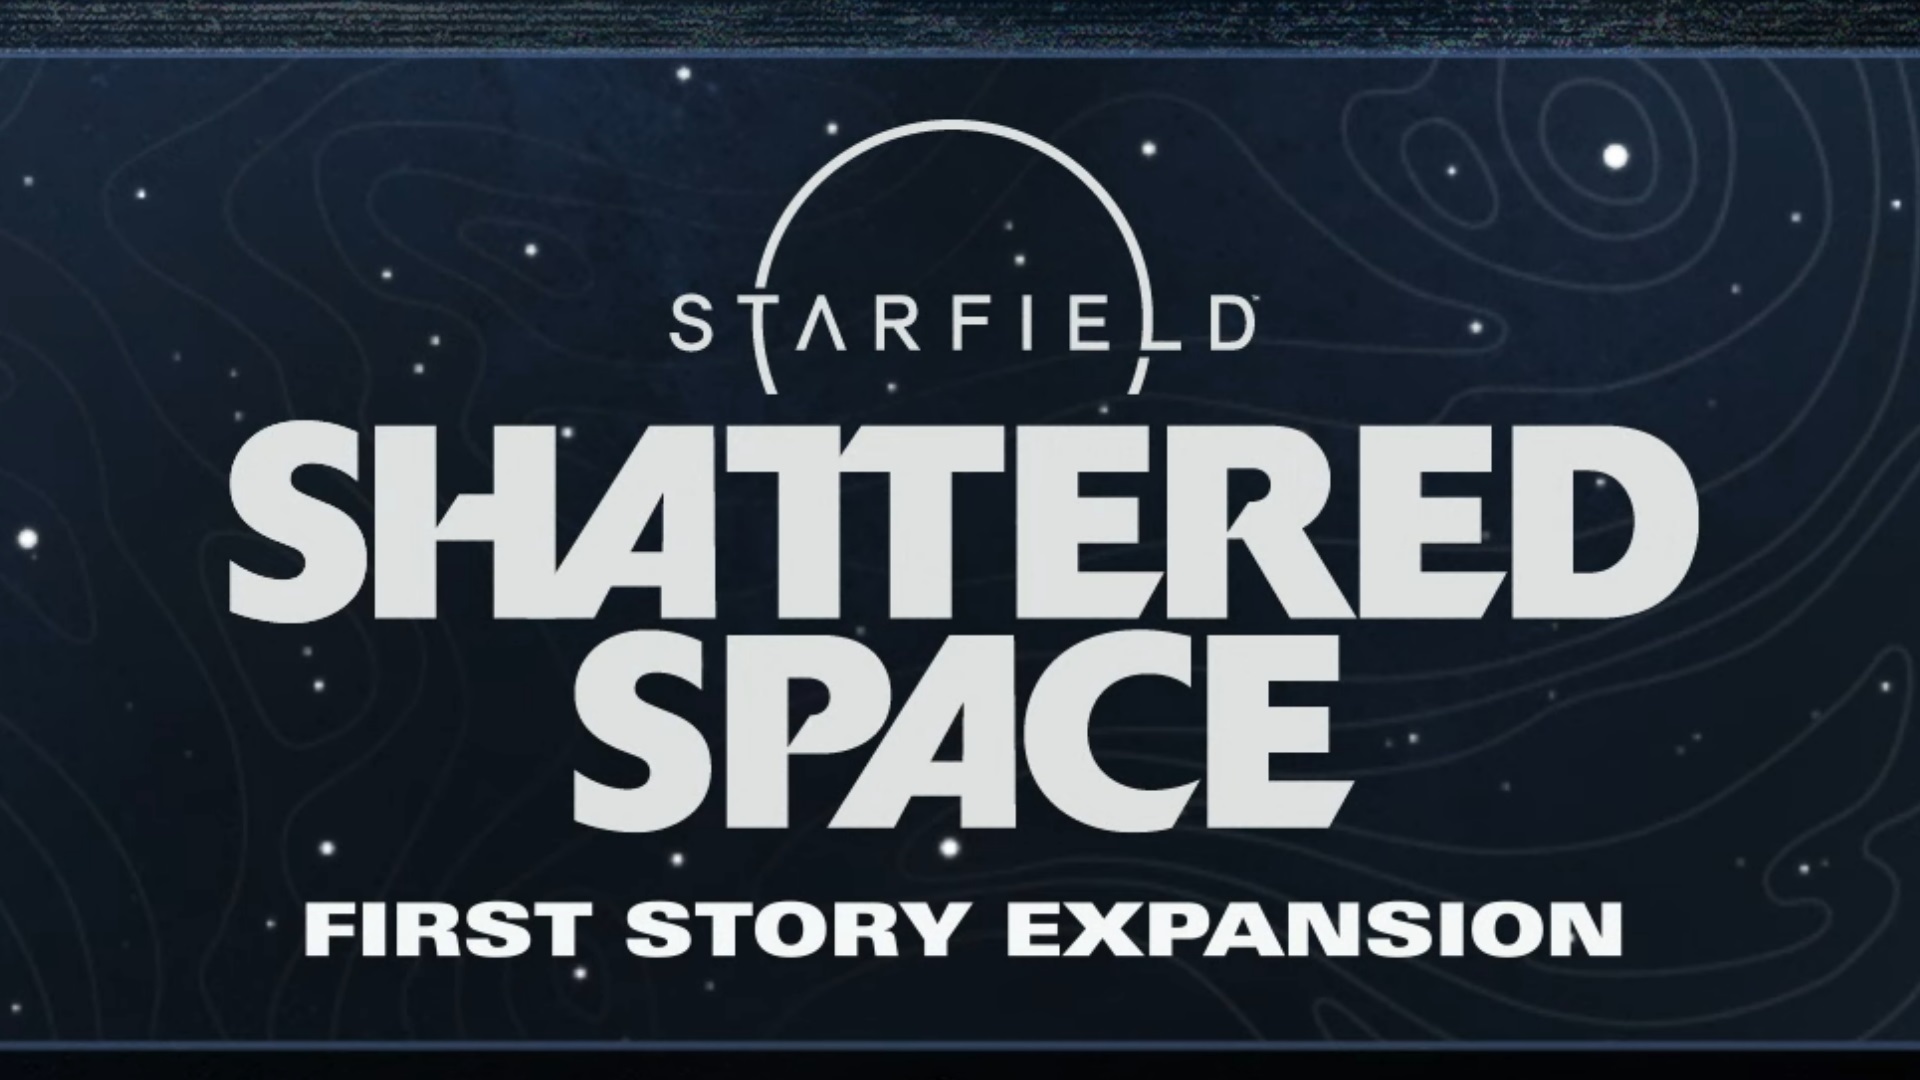 Starfield Shattered Space release date and content prediction